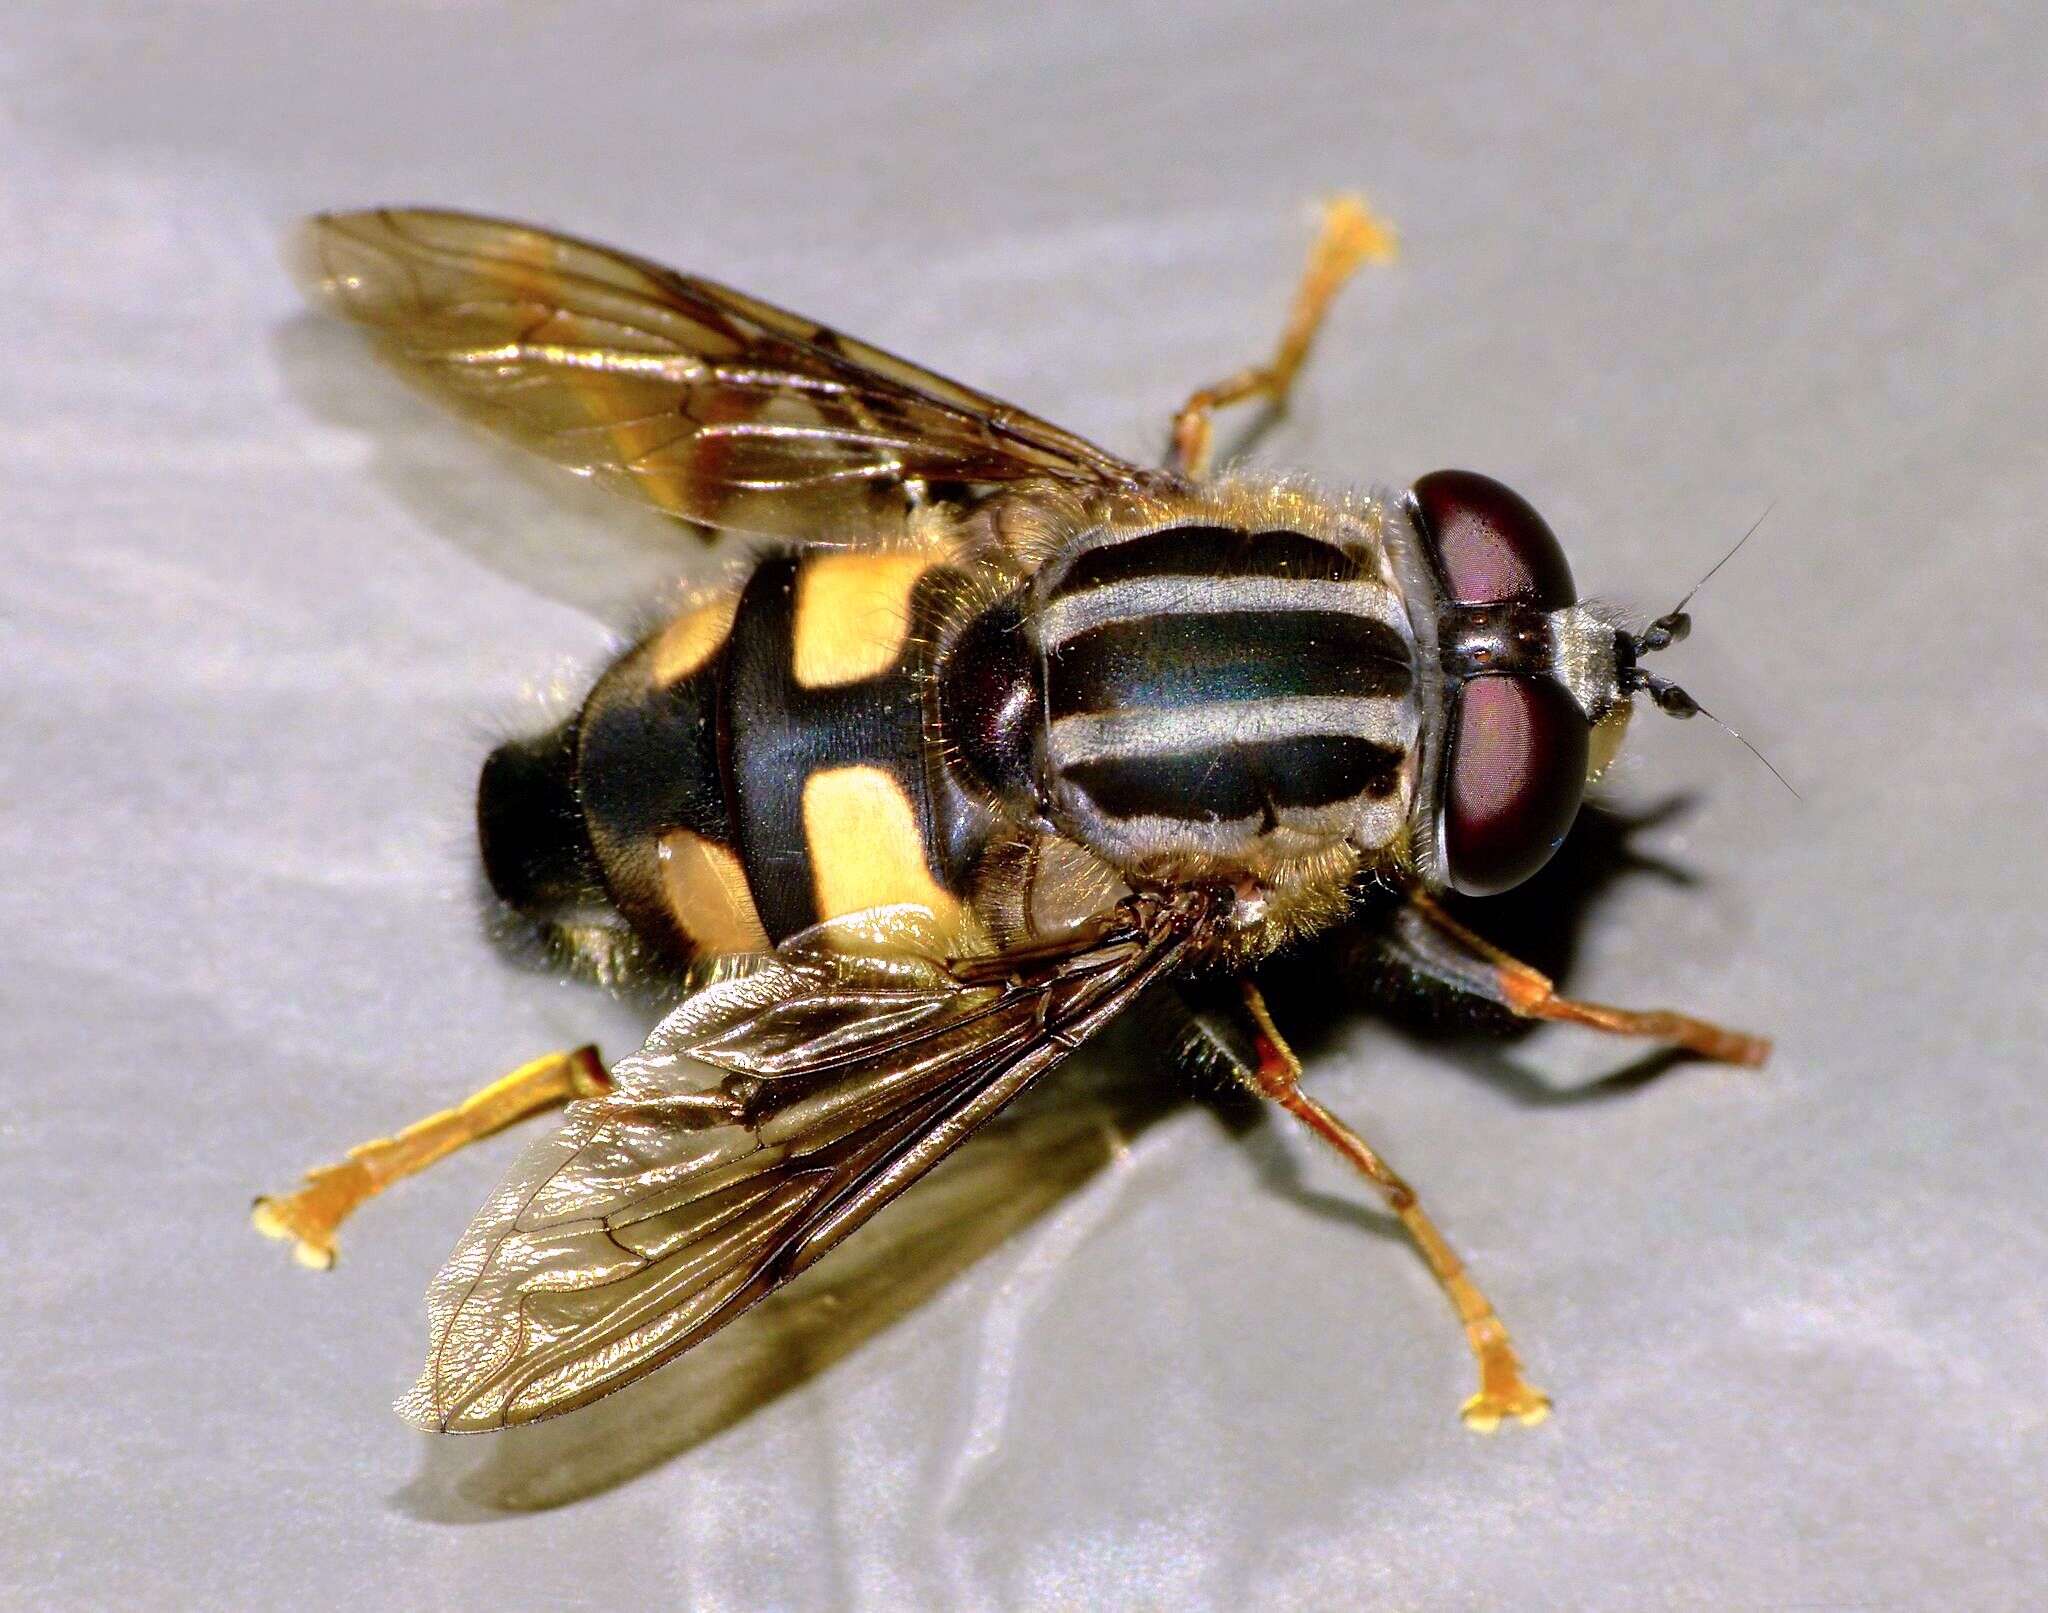 Image of three-lined hoverfly